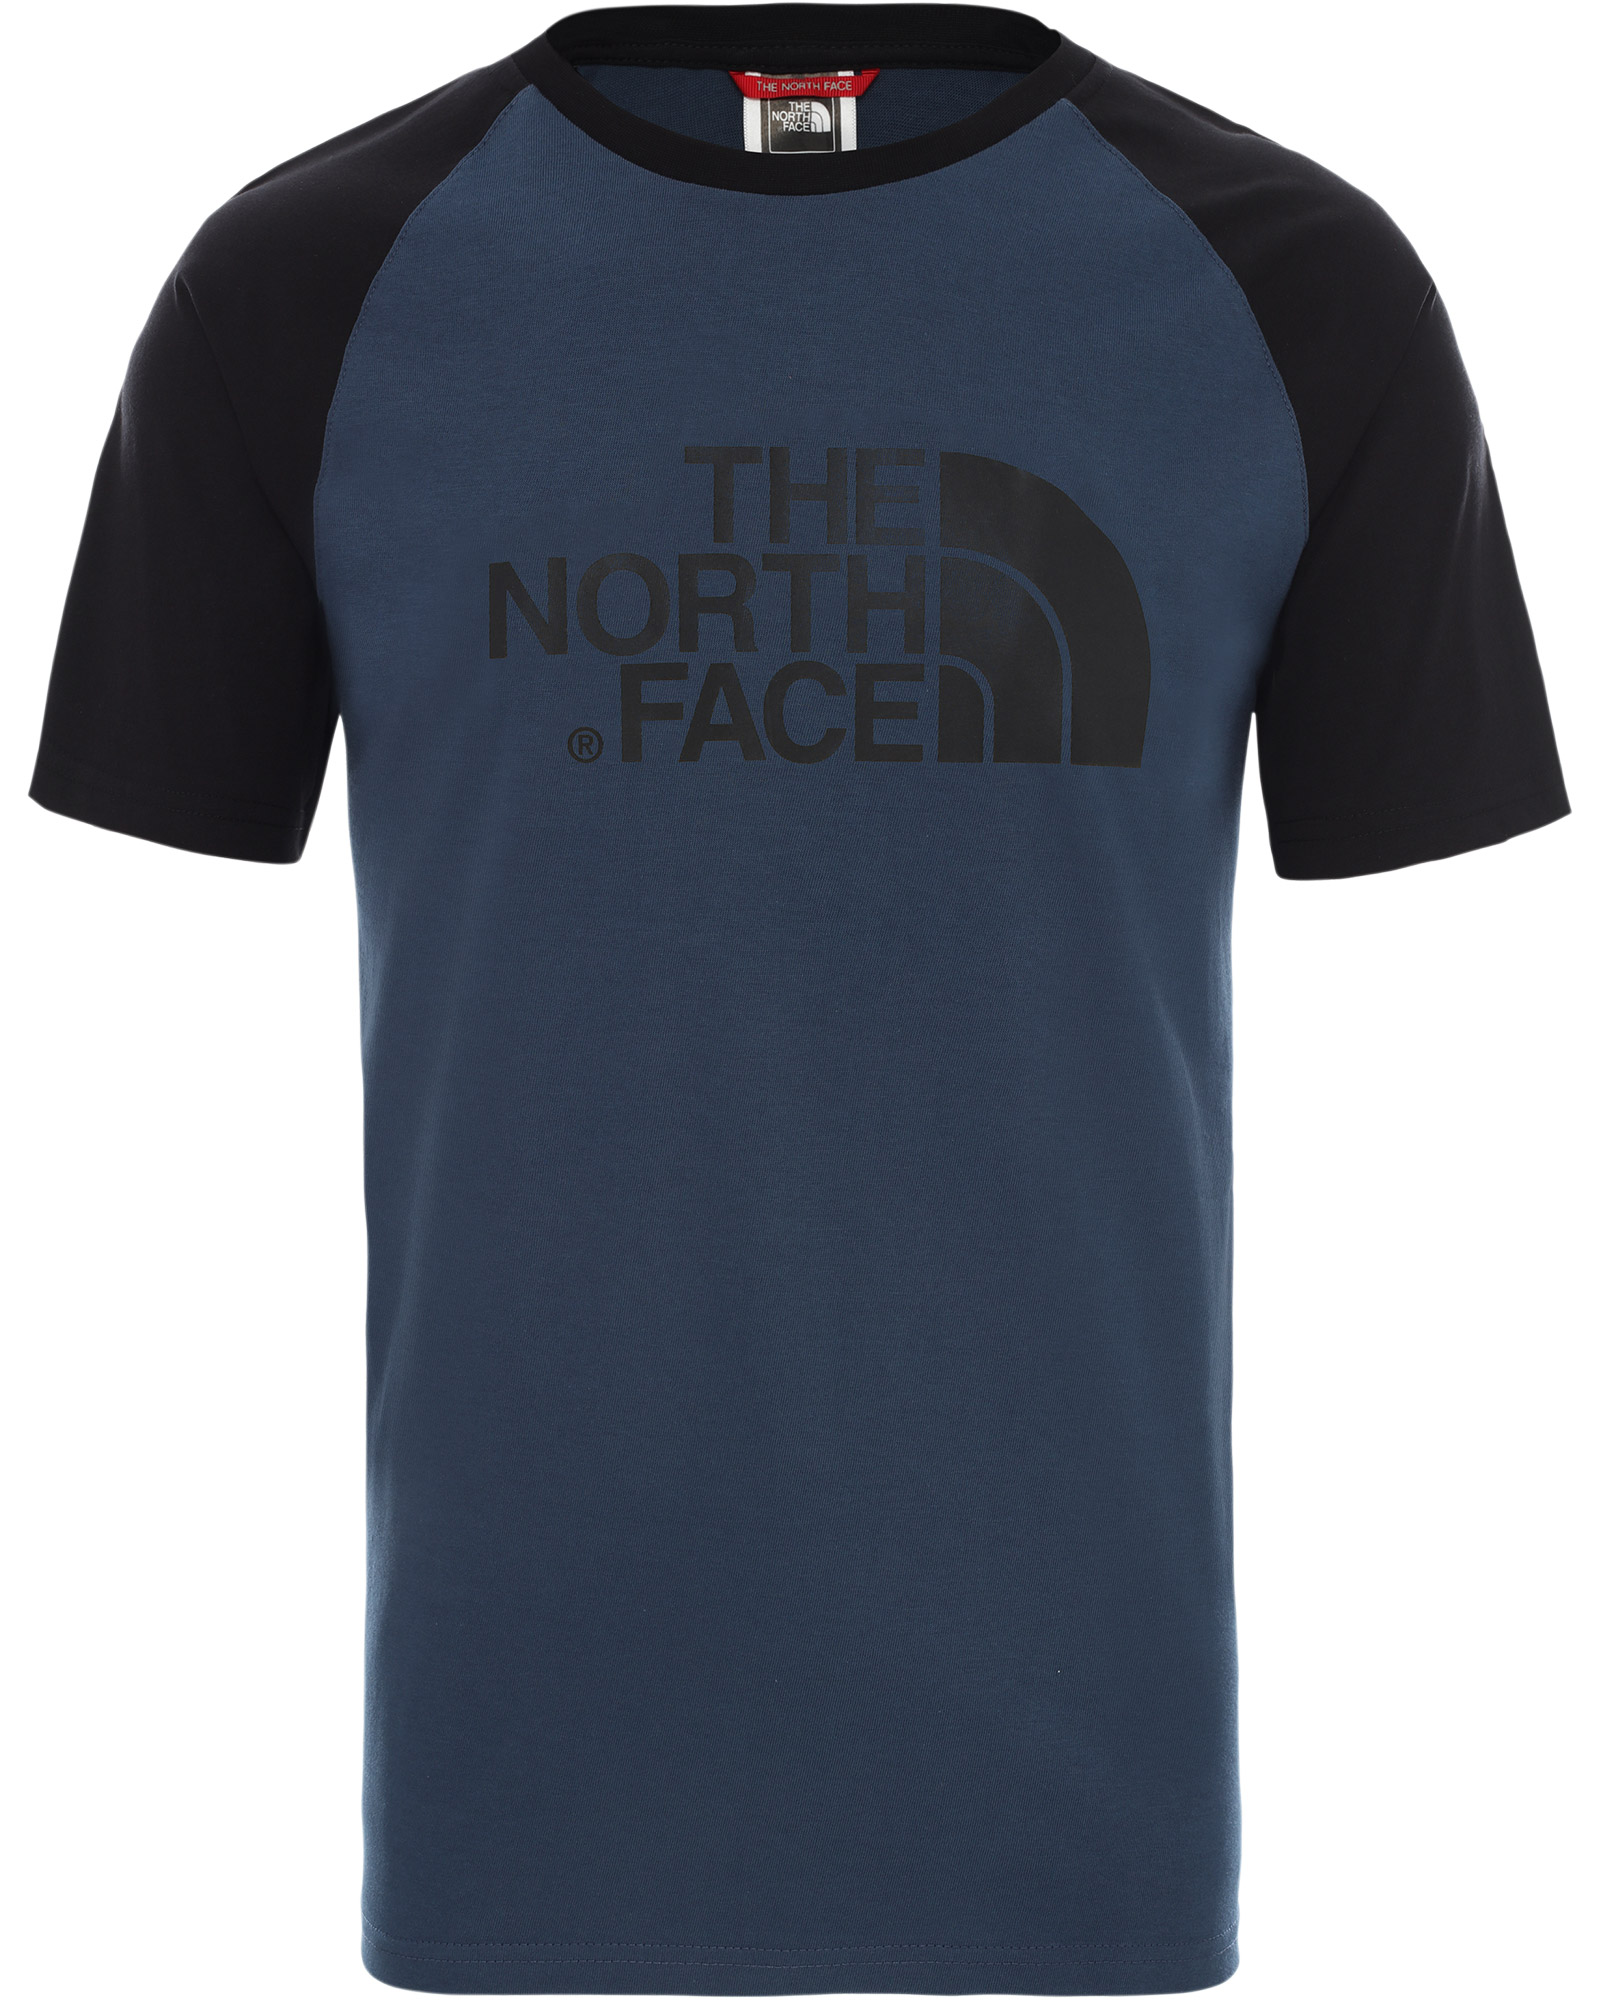 The North Face Raglan Easy Men’s T Shirt - Blue Wing Teal S